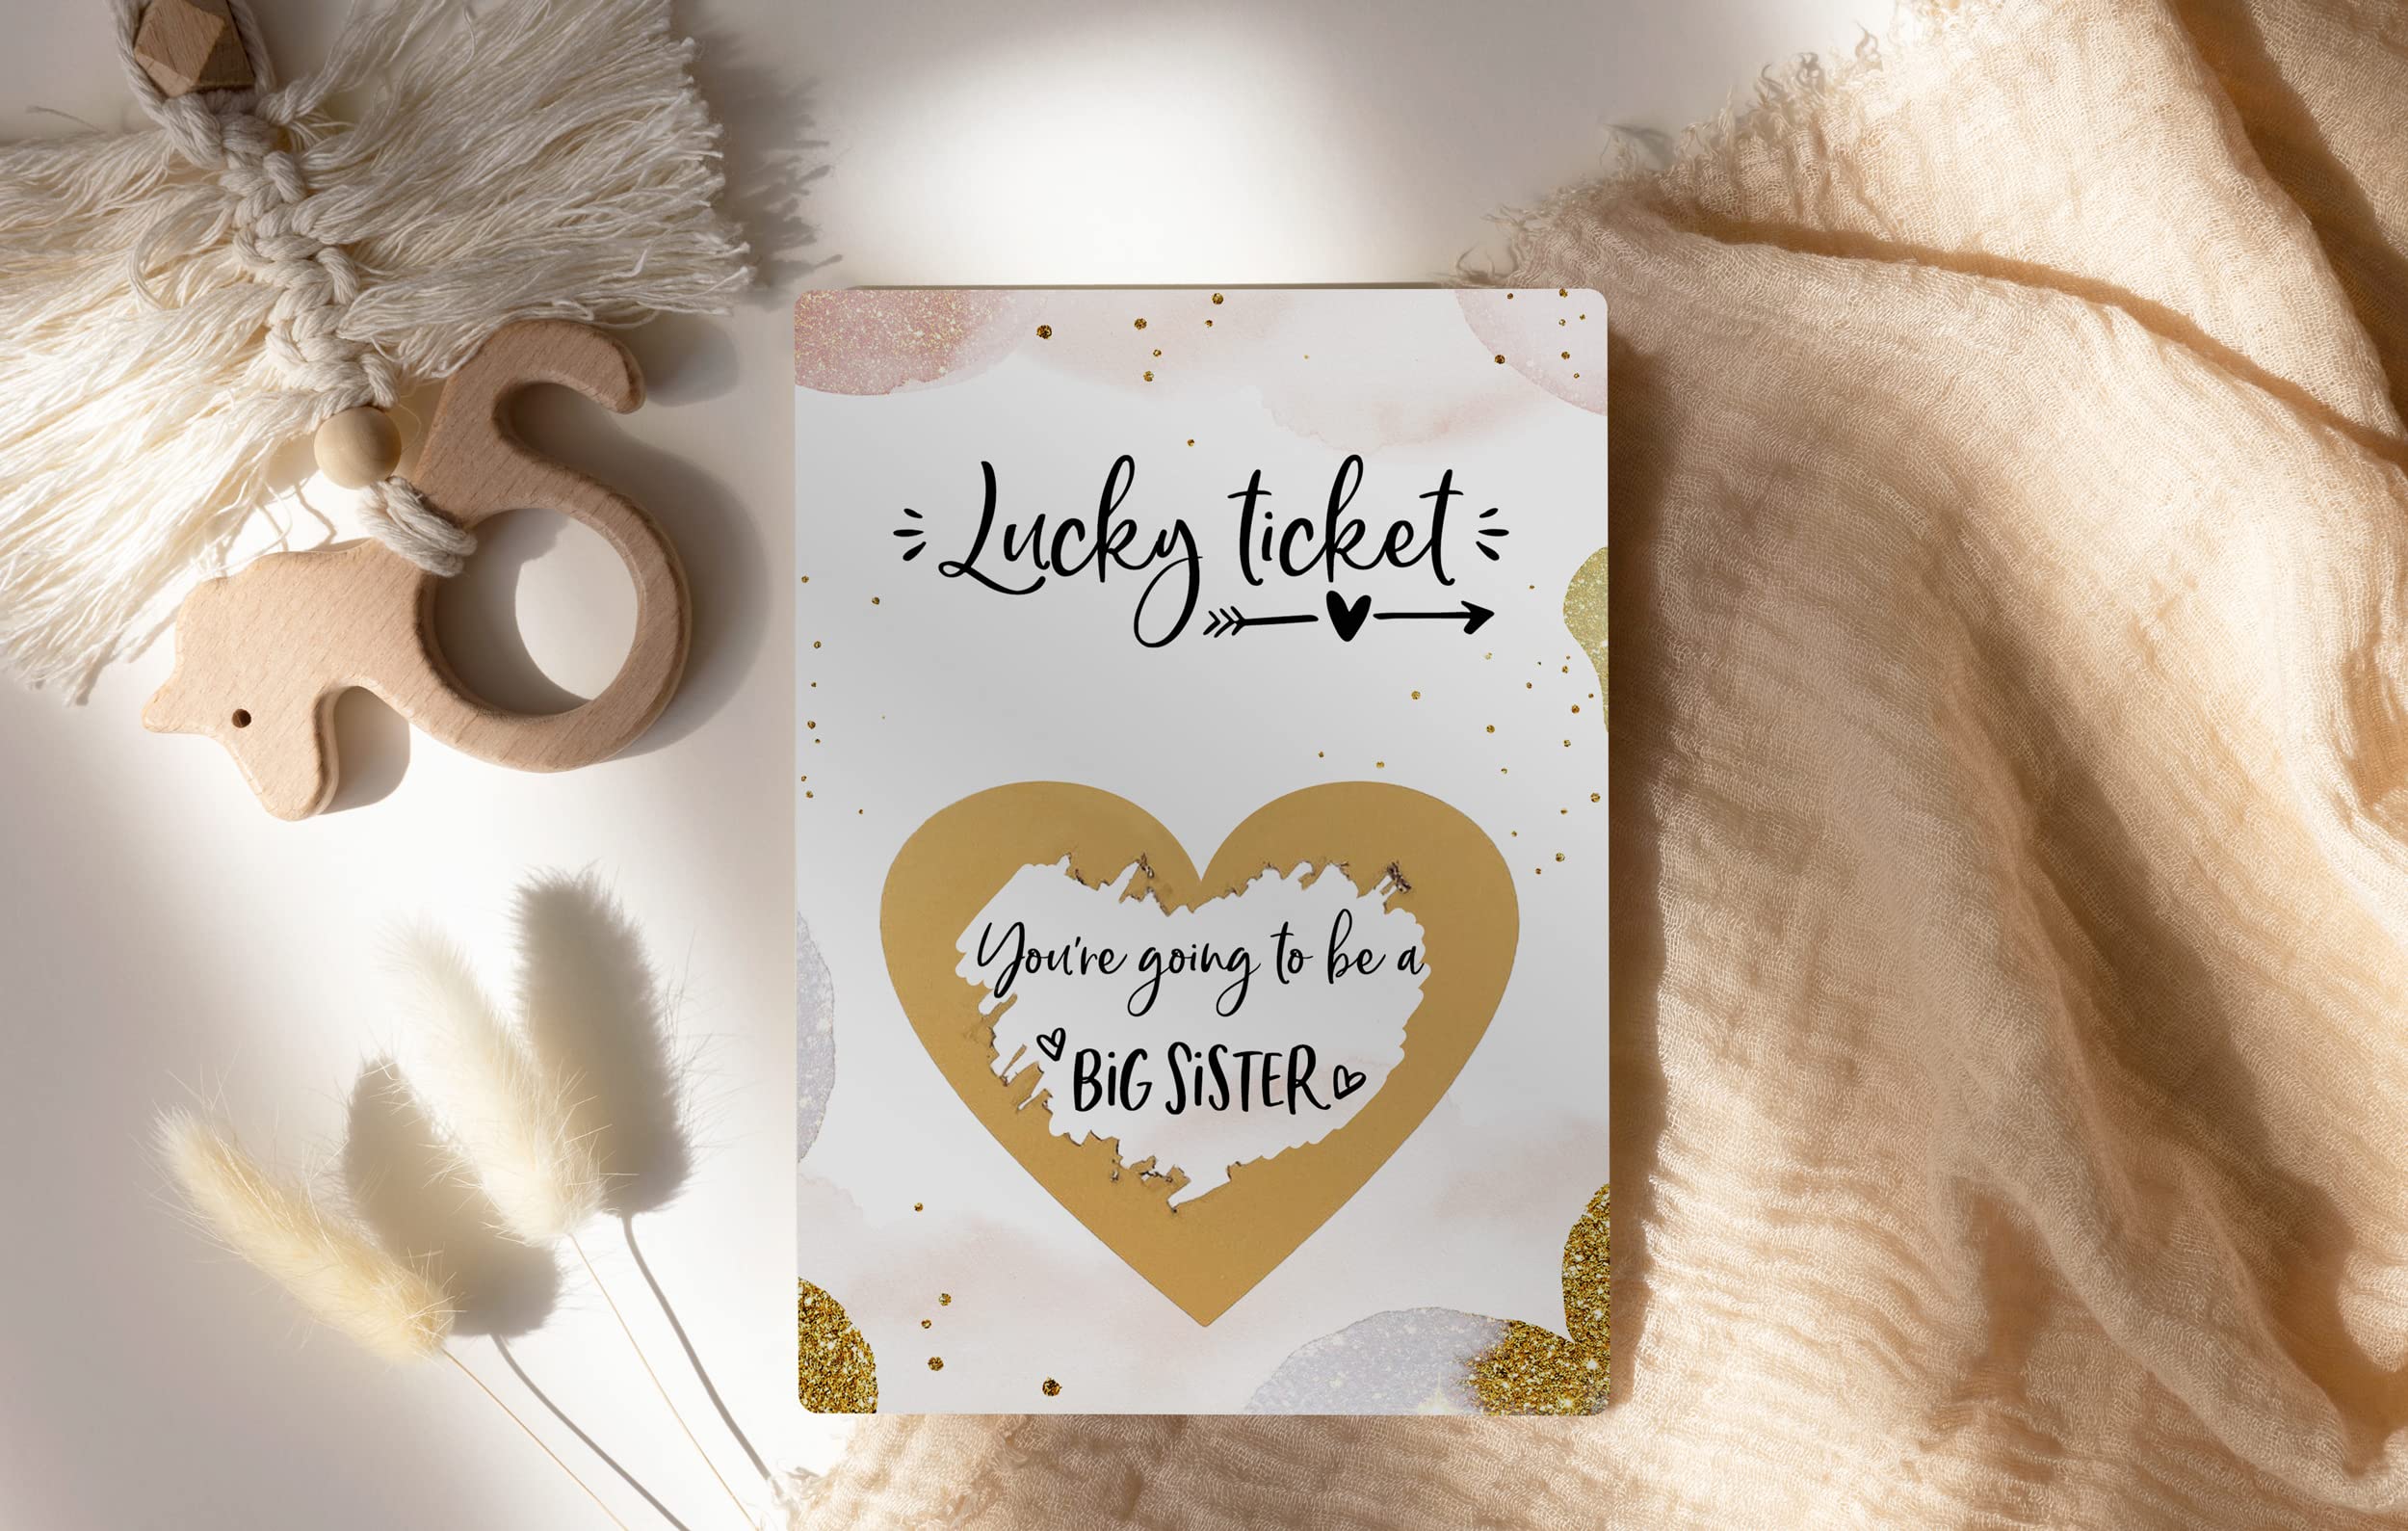 Joli Coon You're going to be a big sister - Scratch card with envelope - Big Sister announcement